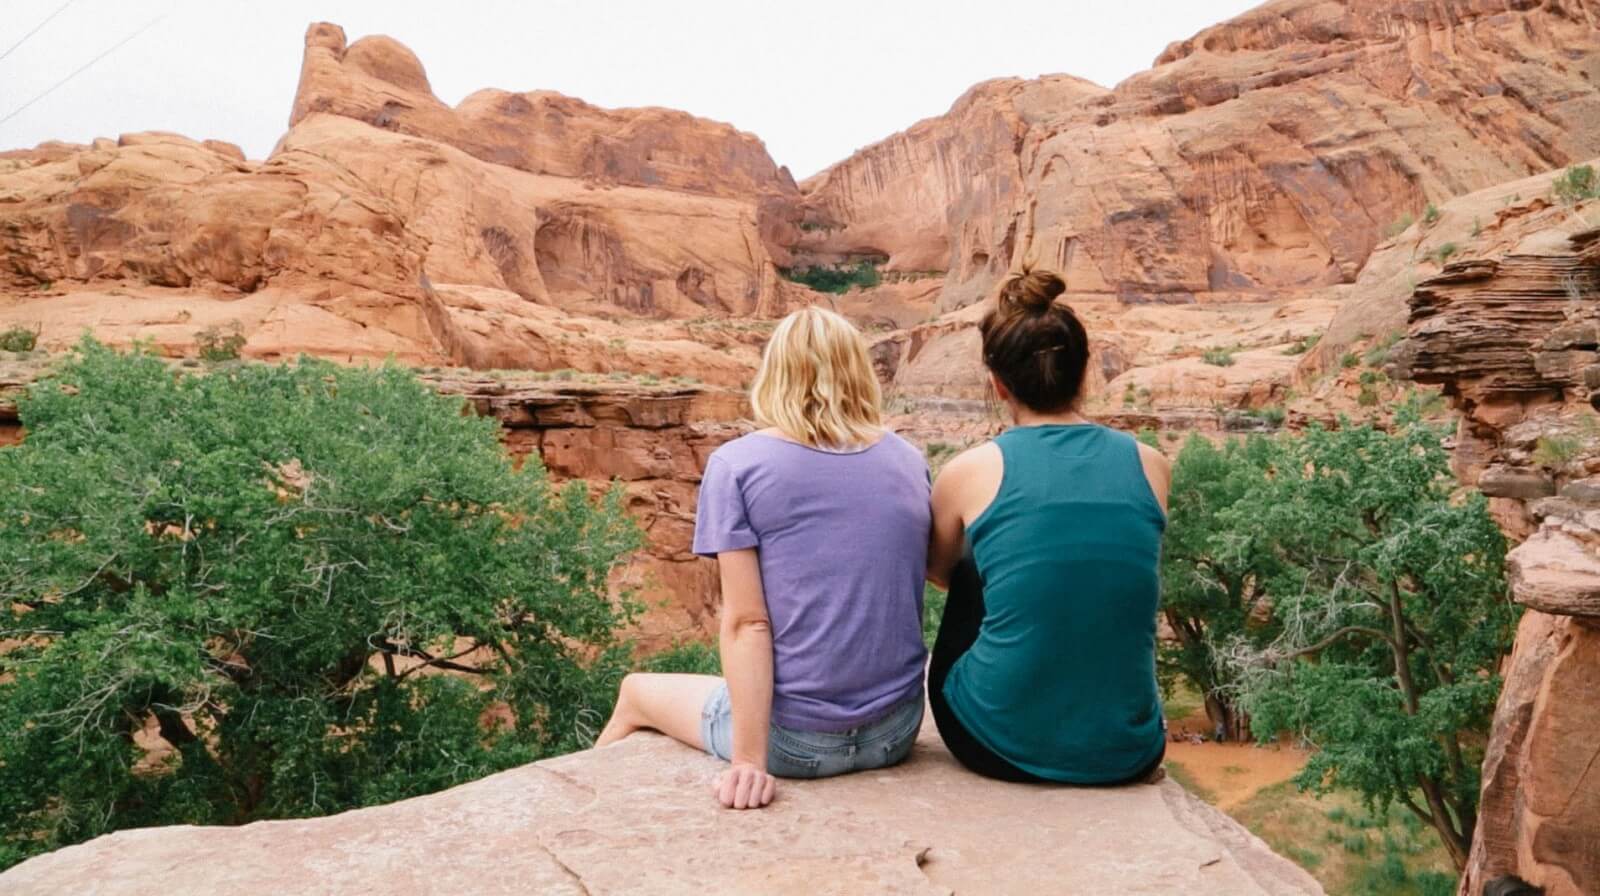 Girls looking at scenery